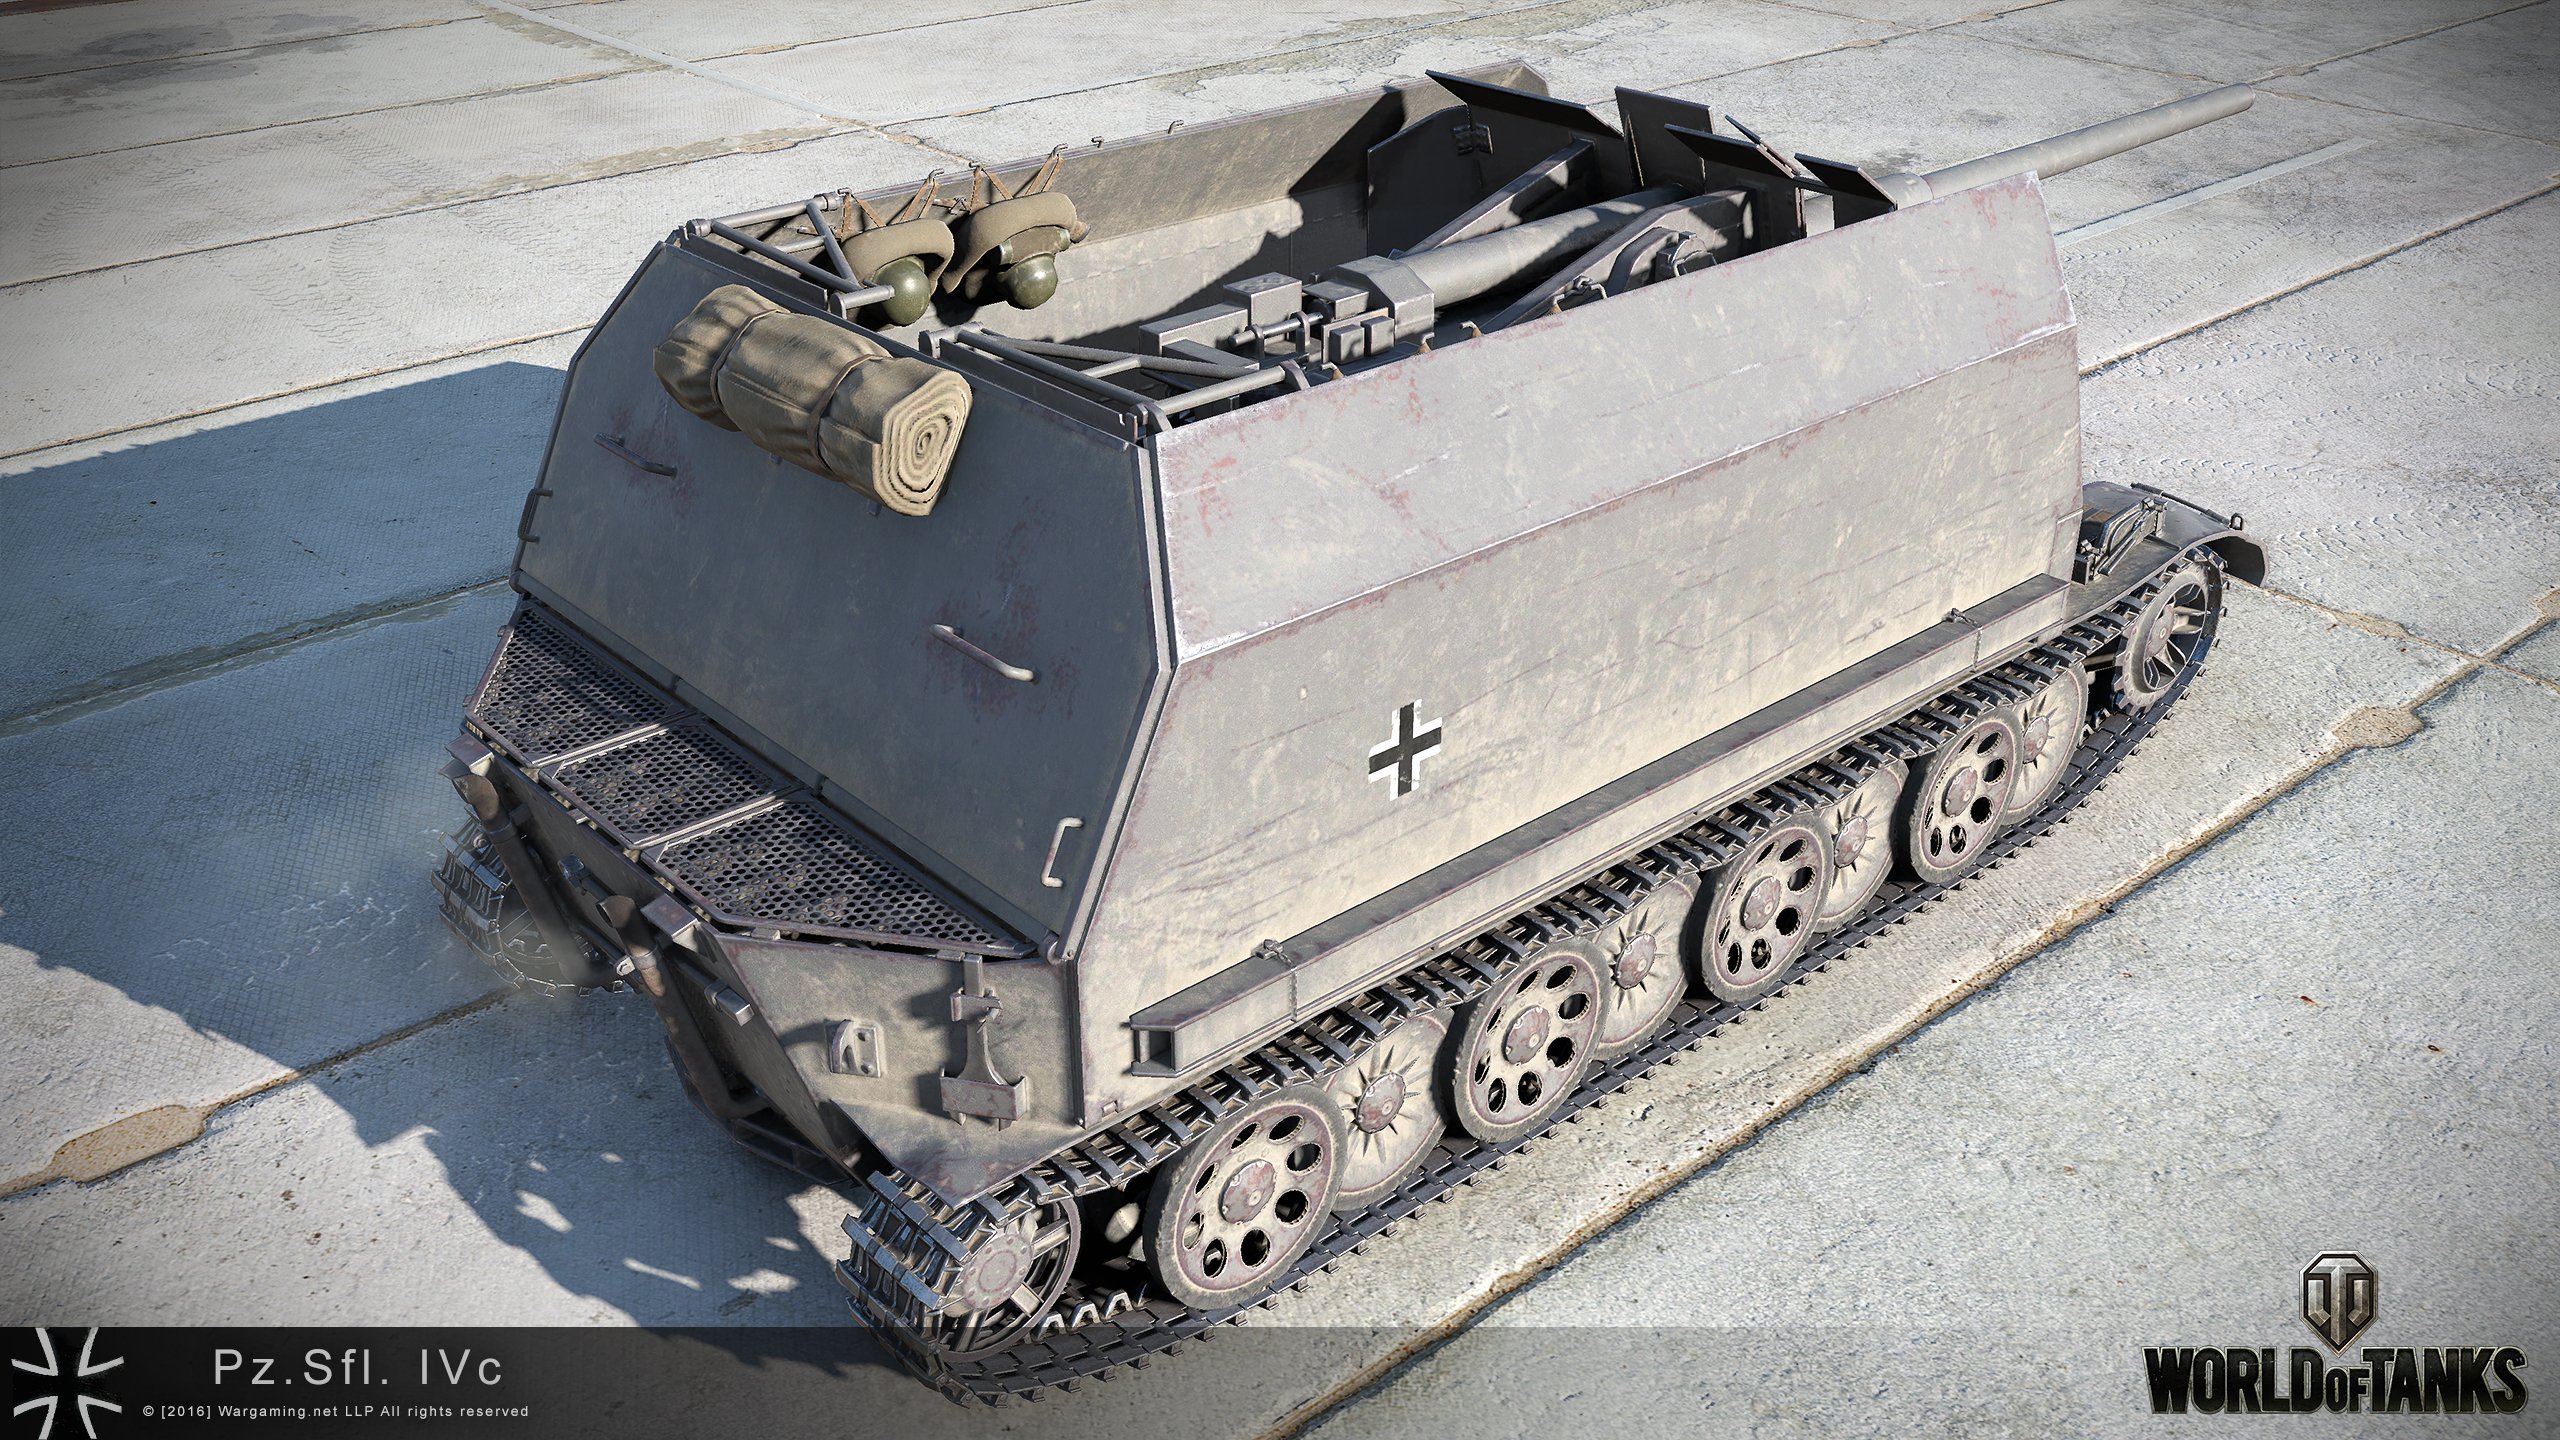 World of Tanks 9.17 B1 Pz Sfl IVb and Pz Sfl IVc hd pictures.